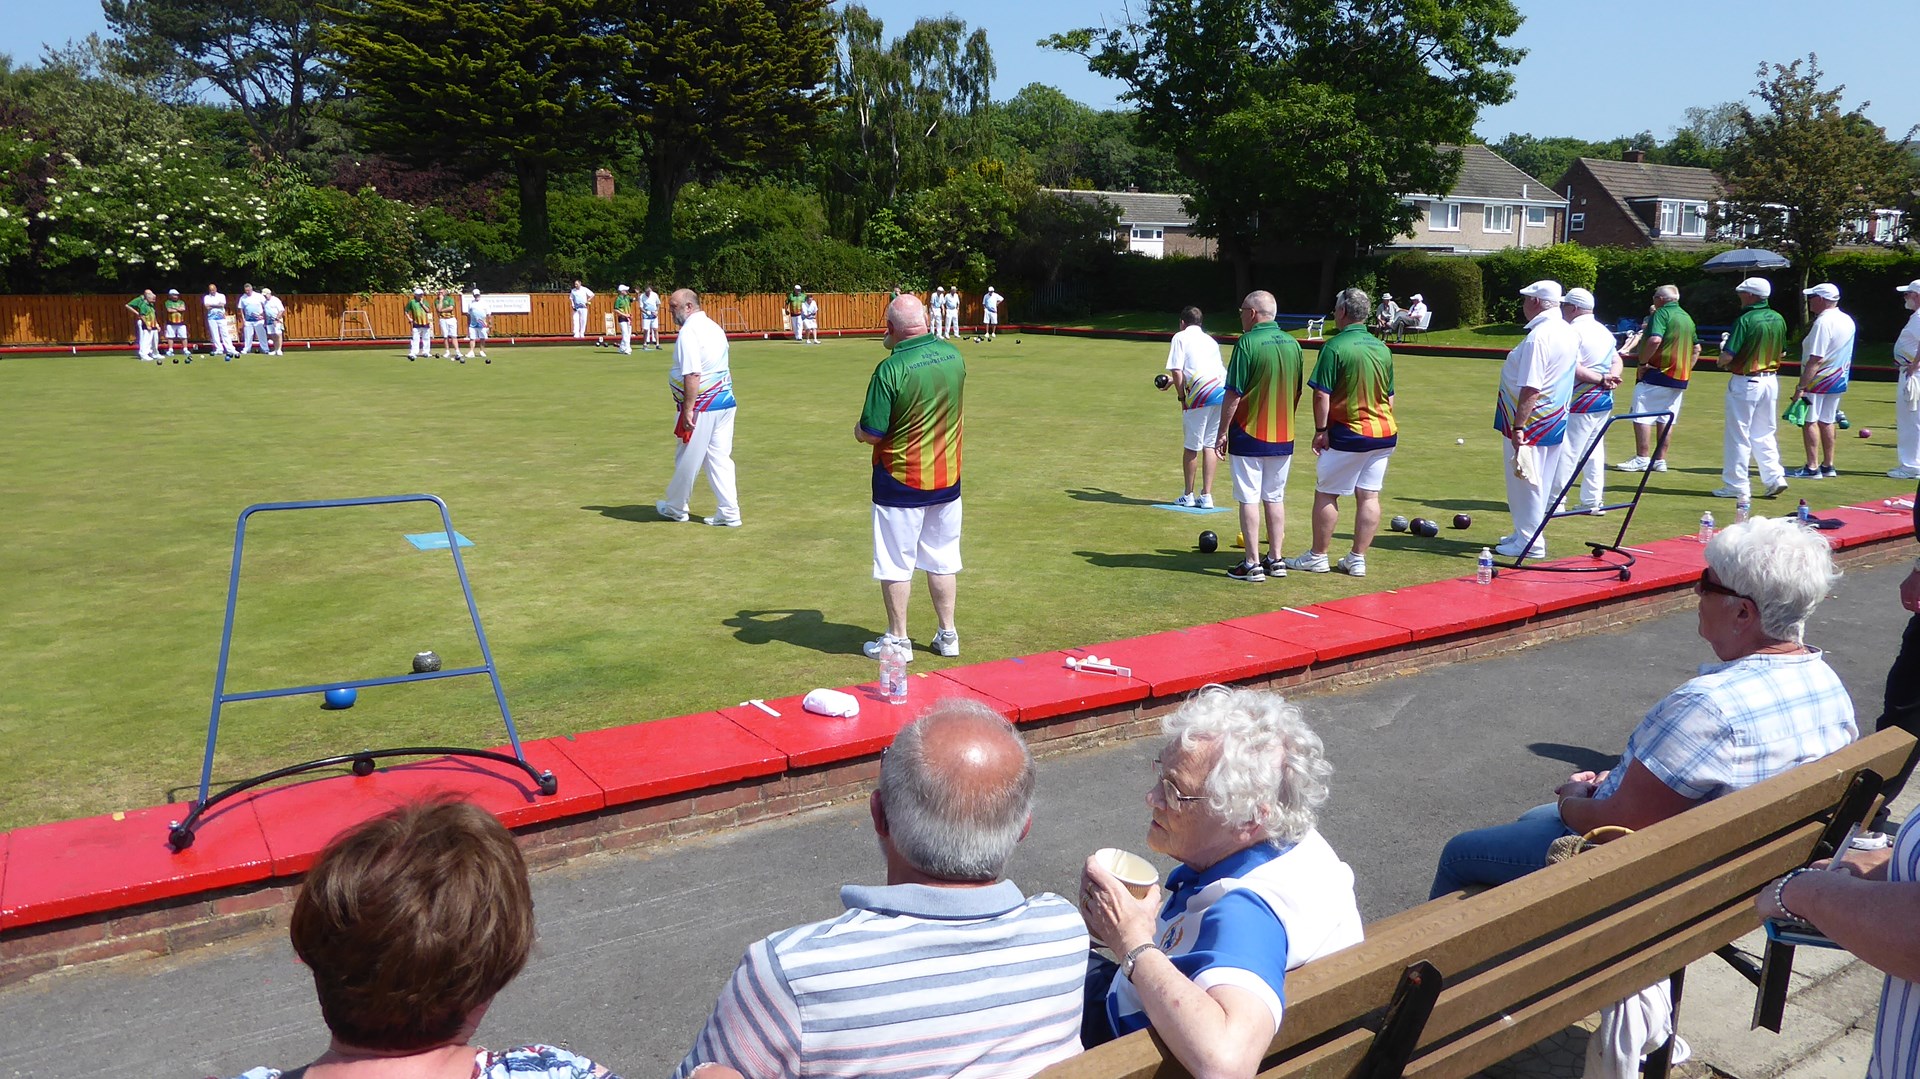 Smiths Dock Bowling Club Alsop cup Yorks vs Northumberl'd